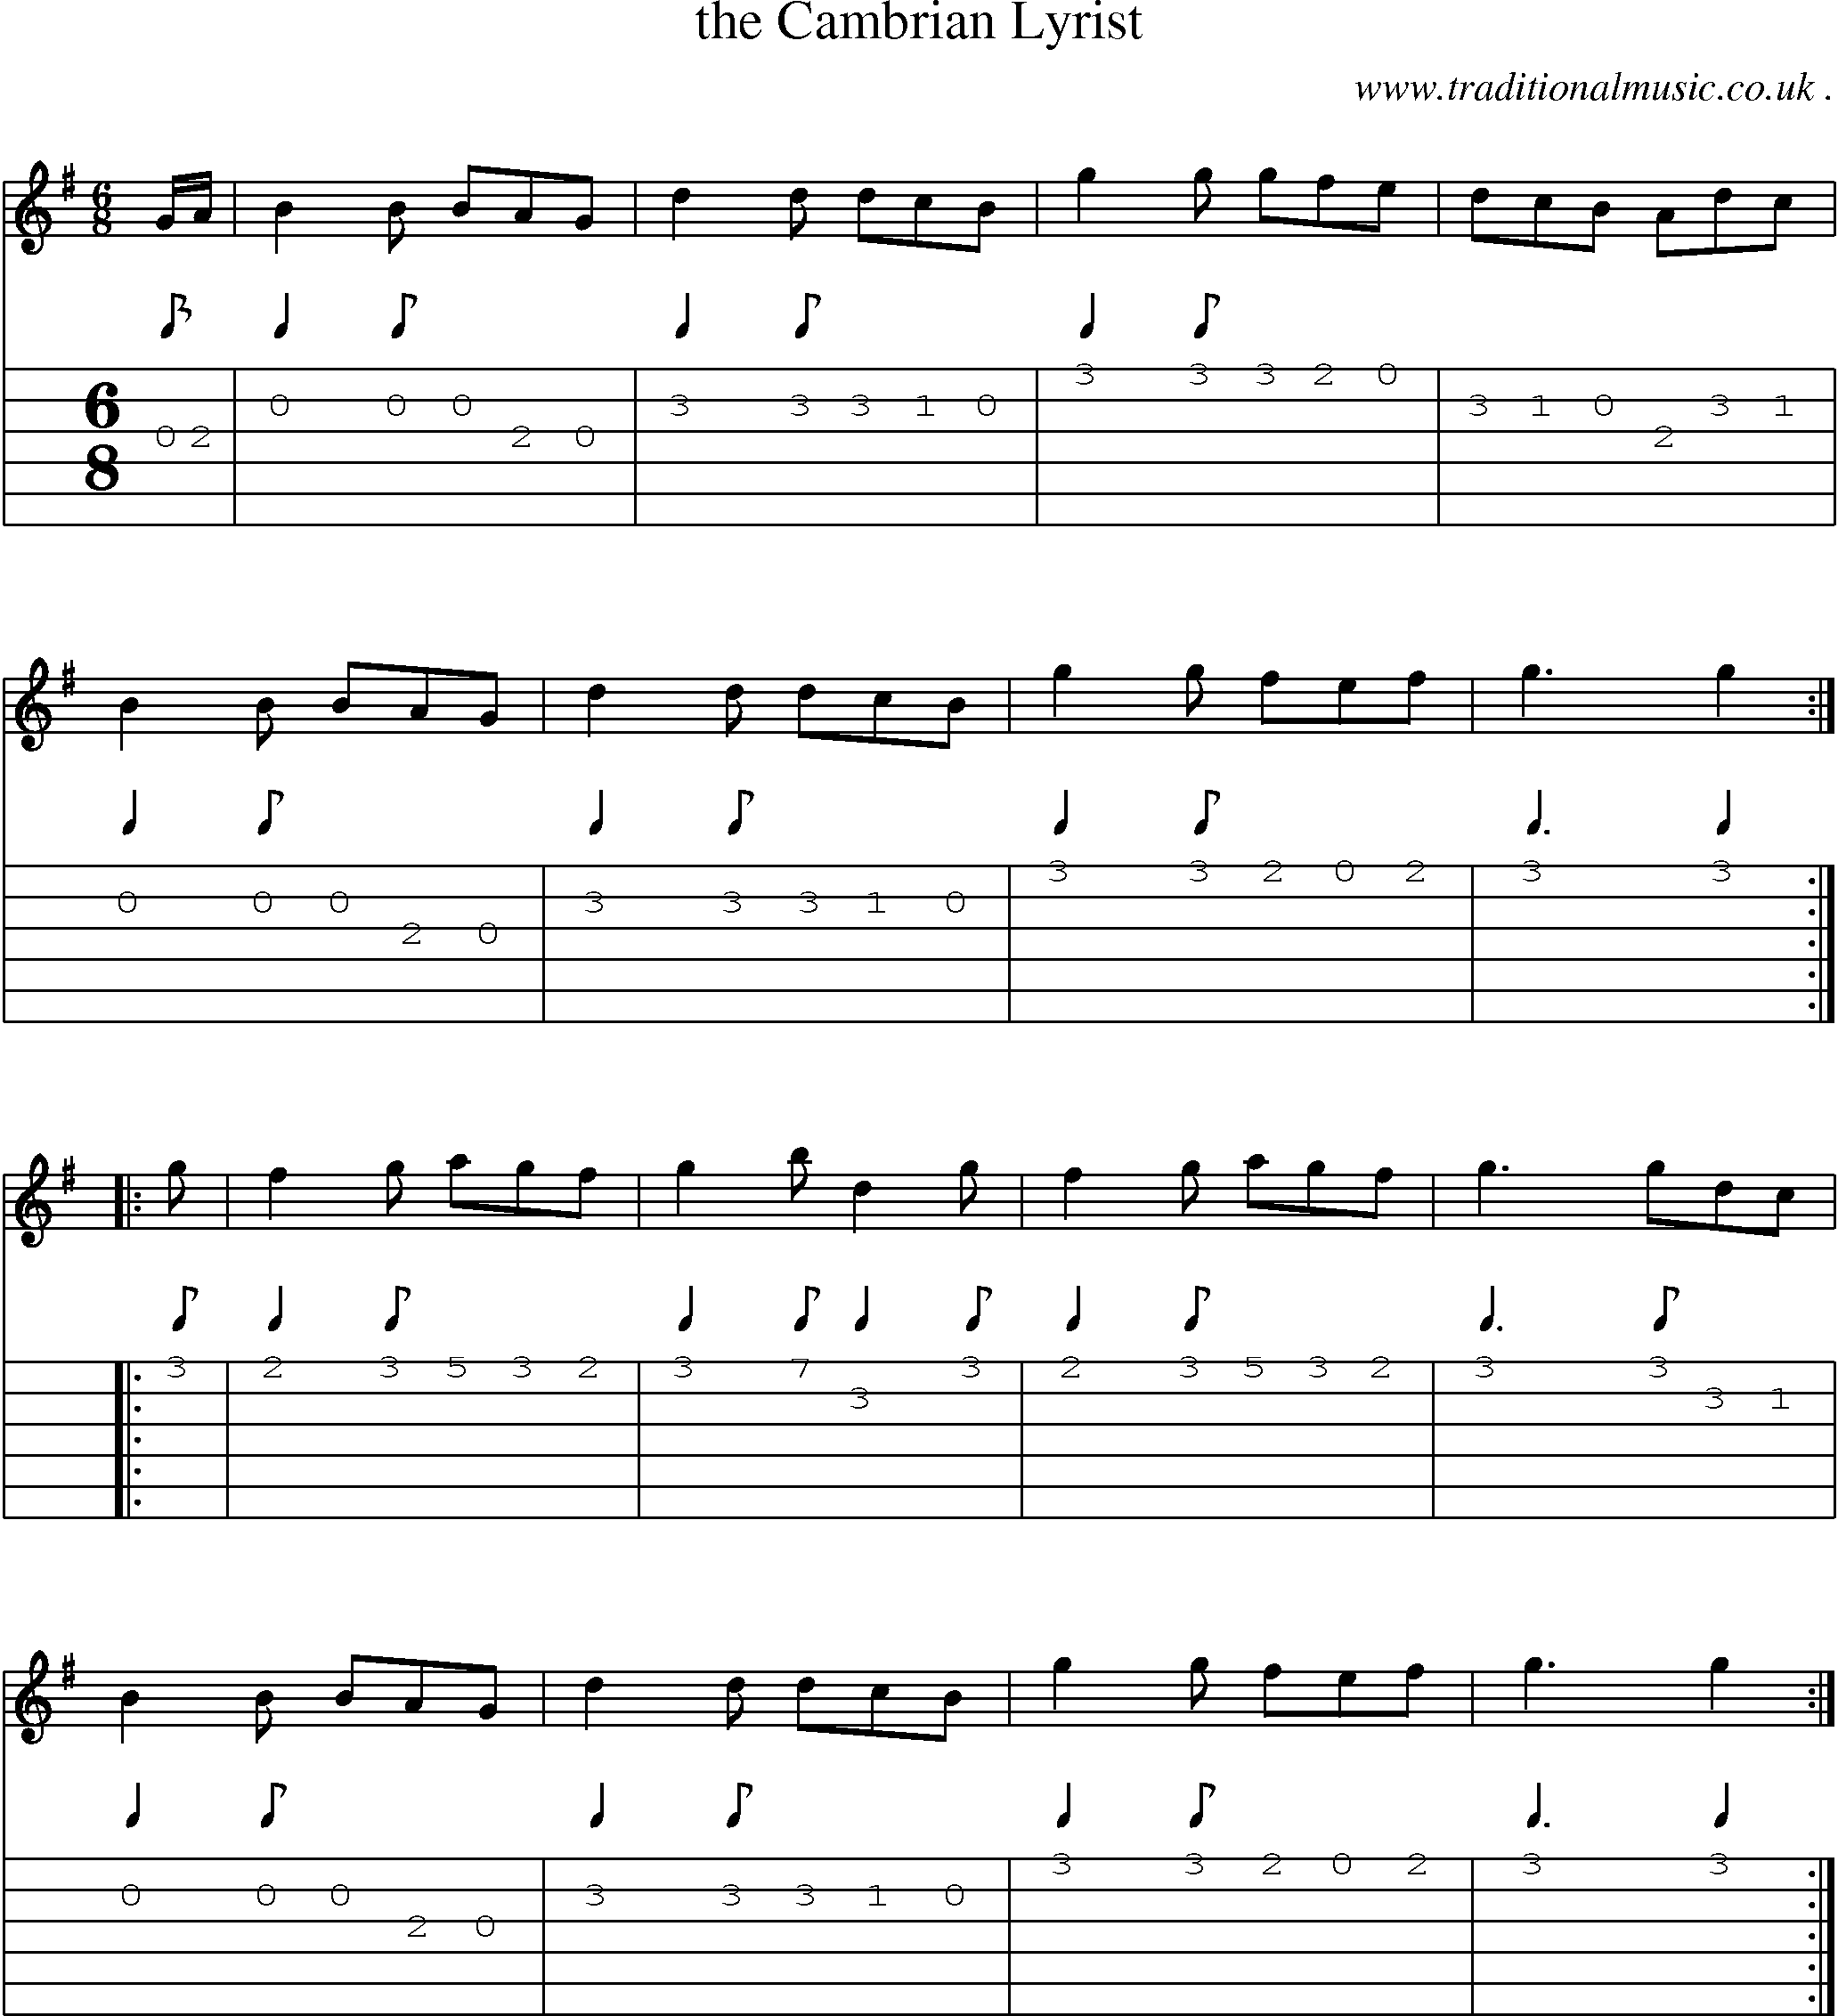 Sheet-Music and Guitar Tabs for The Cambrian Lyrist